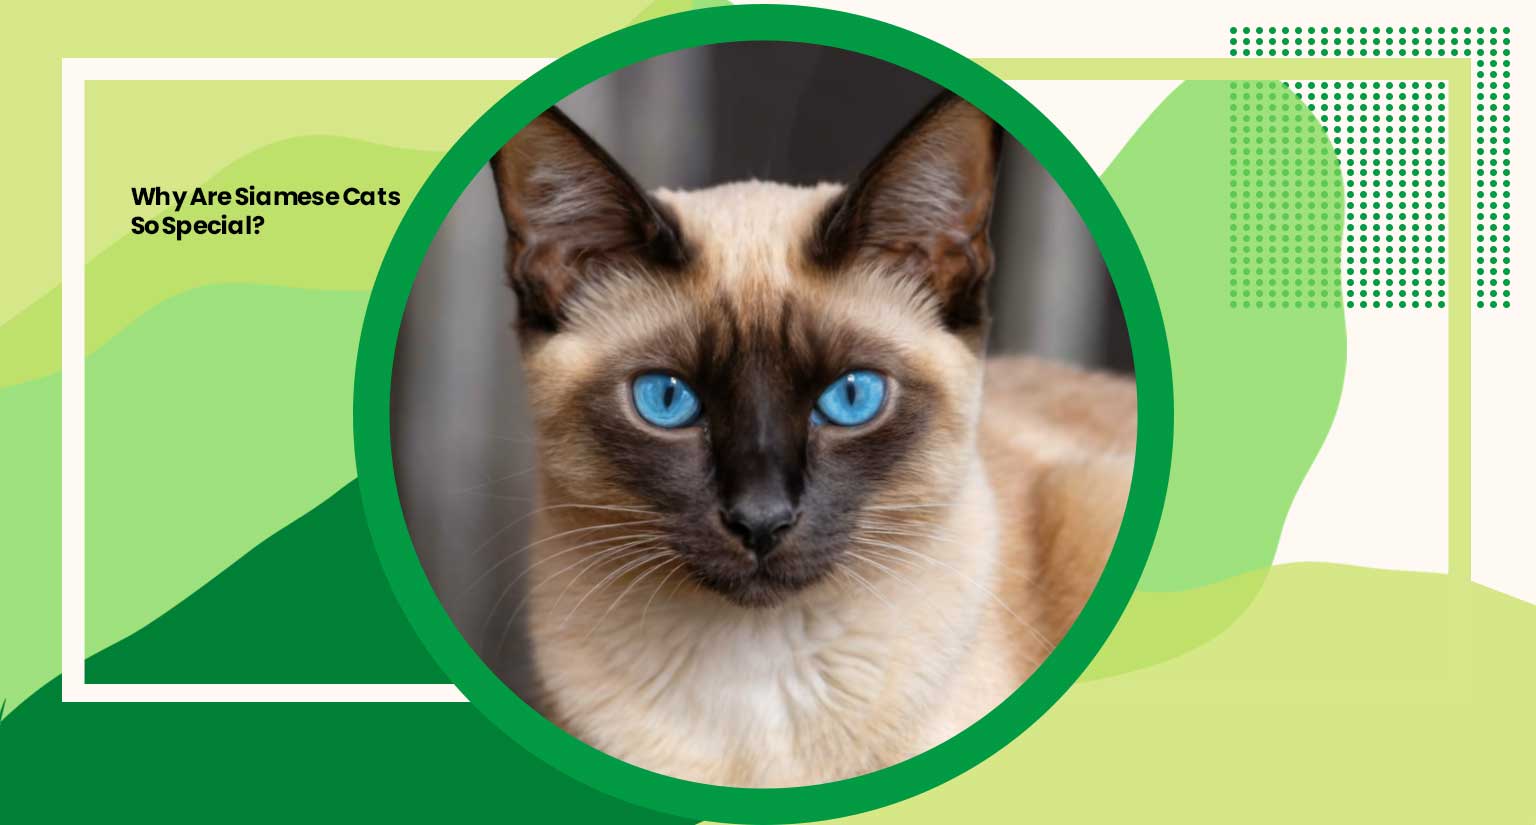 Why Are Siamese Cats So Special?